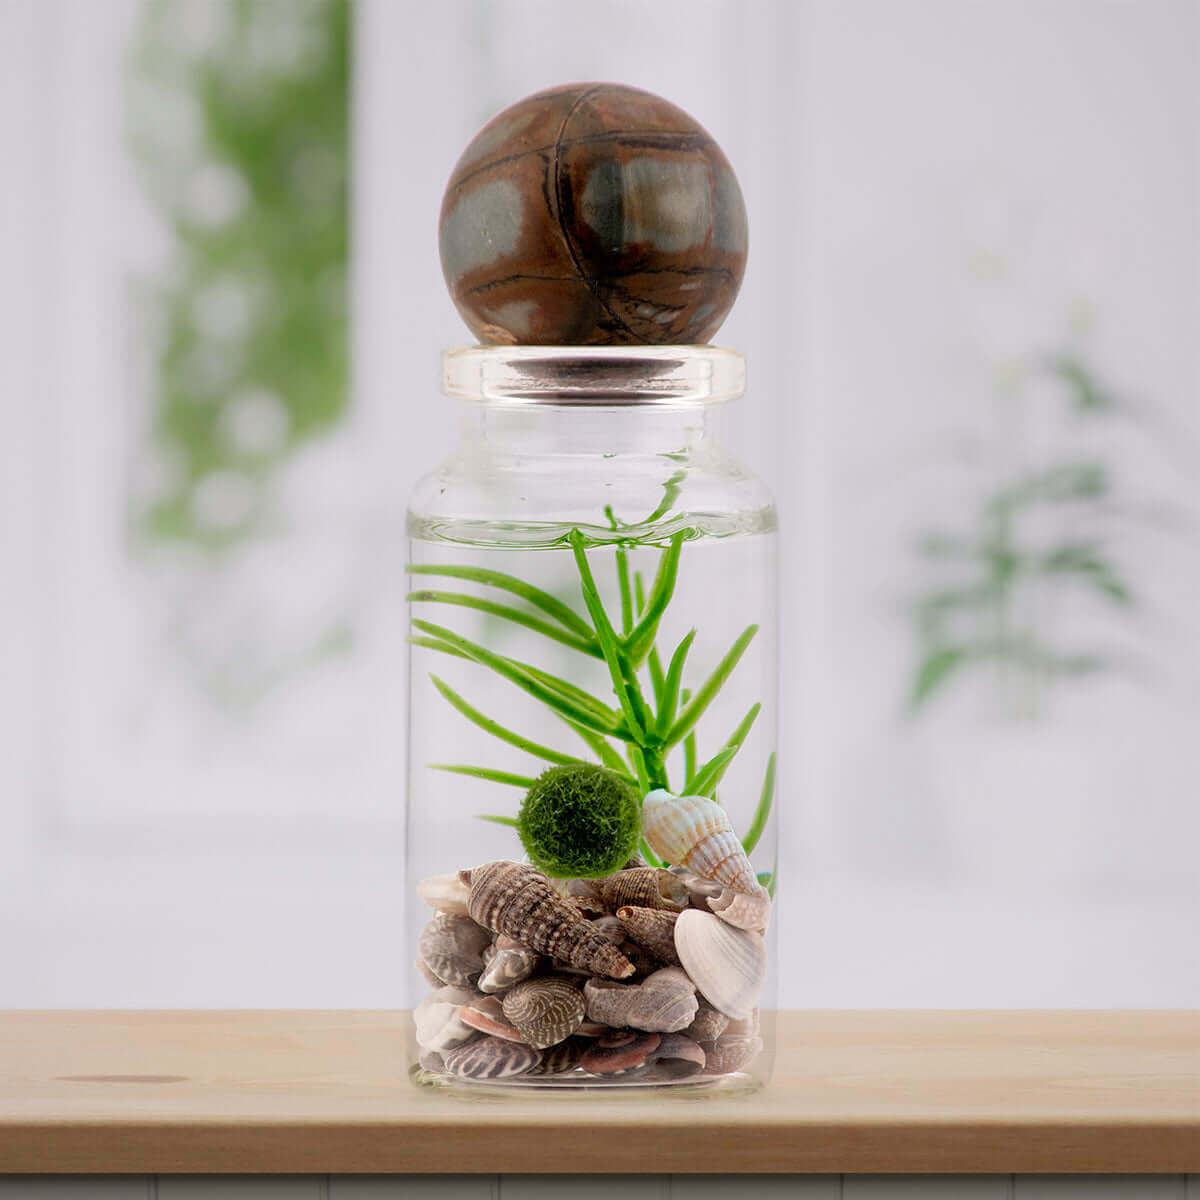 Picasso Jasper sphere resting atop a moss ball pet terrarium, adding an artistic touch with its unique pattern.